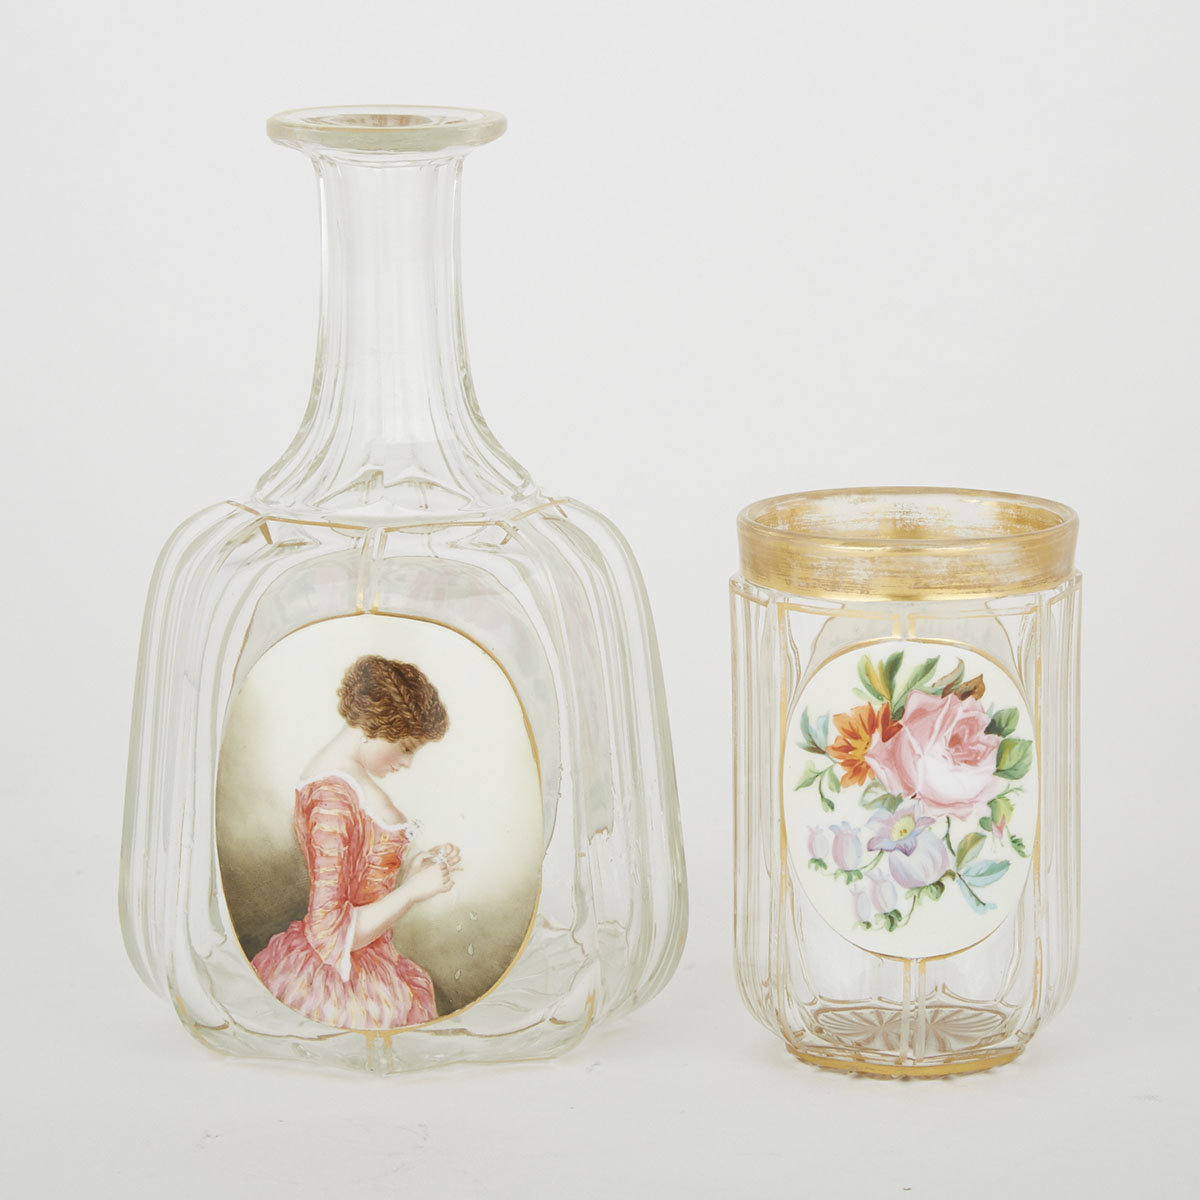 Bohemian Overlaid, Cut and Enameled Glass Water Carafe and Beaker, c.1870